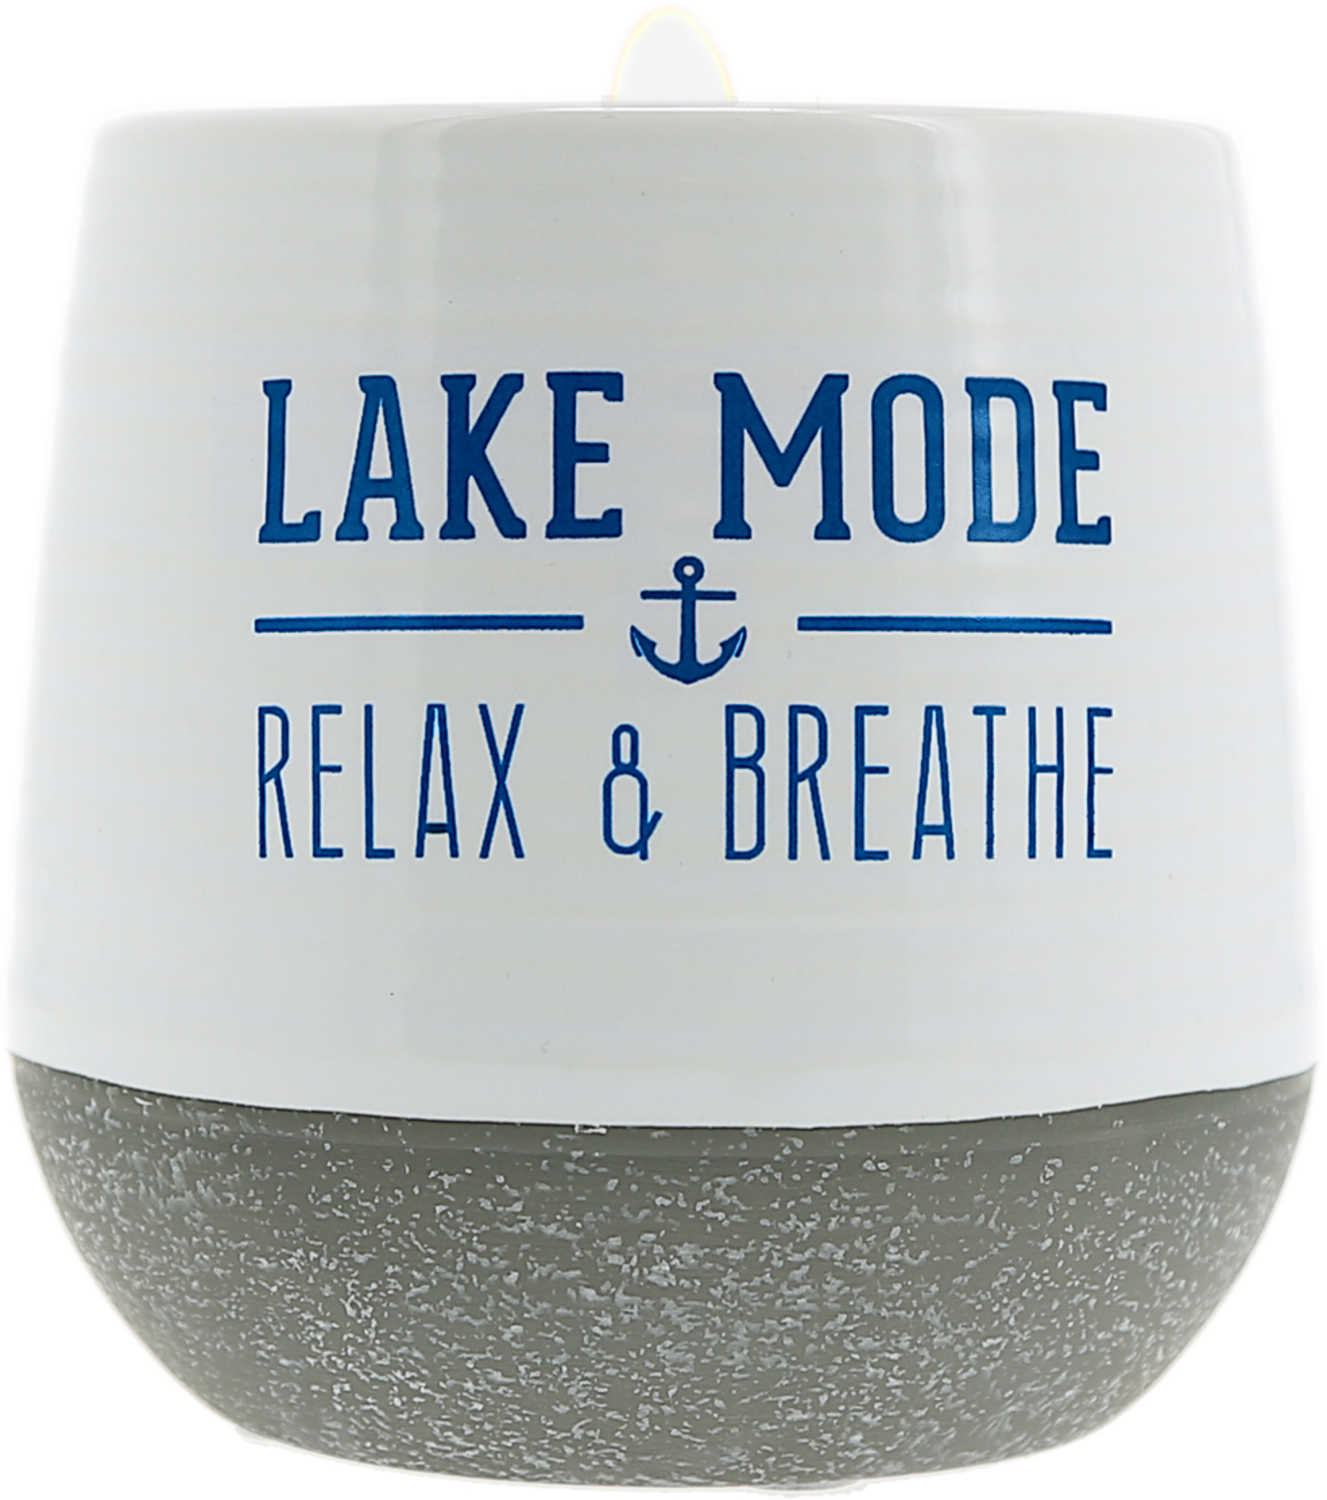 Lake Mode by We People - Lake Mode - 11 oz - 100% Soy Wax Reveal Candle
Scent: Serenity